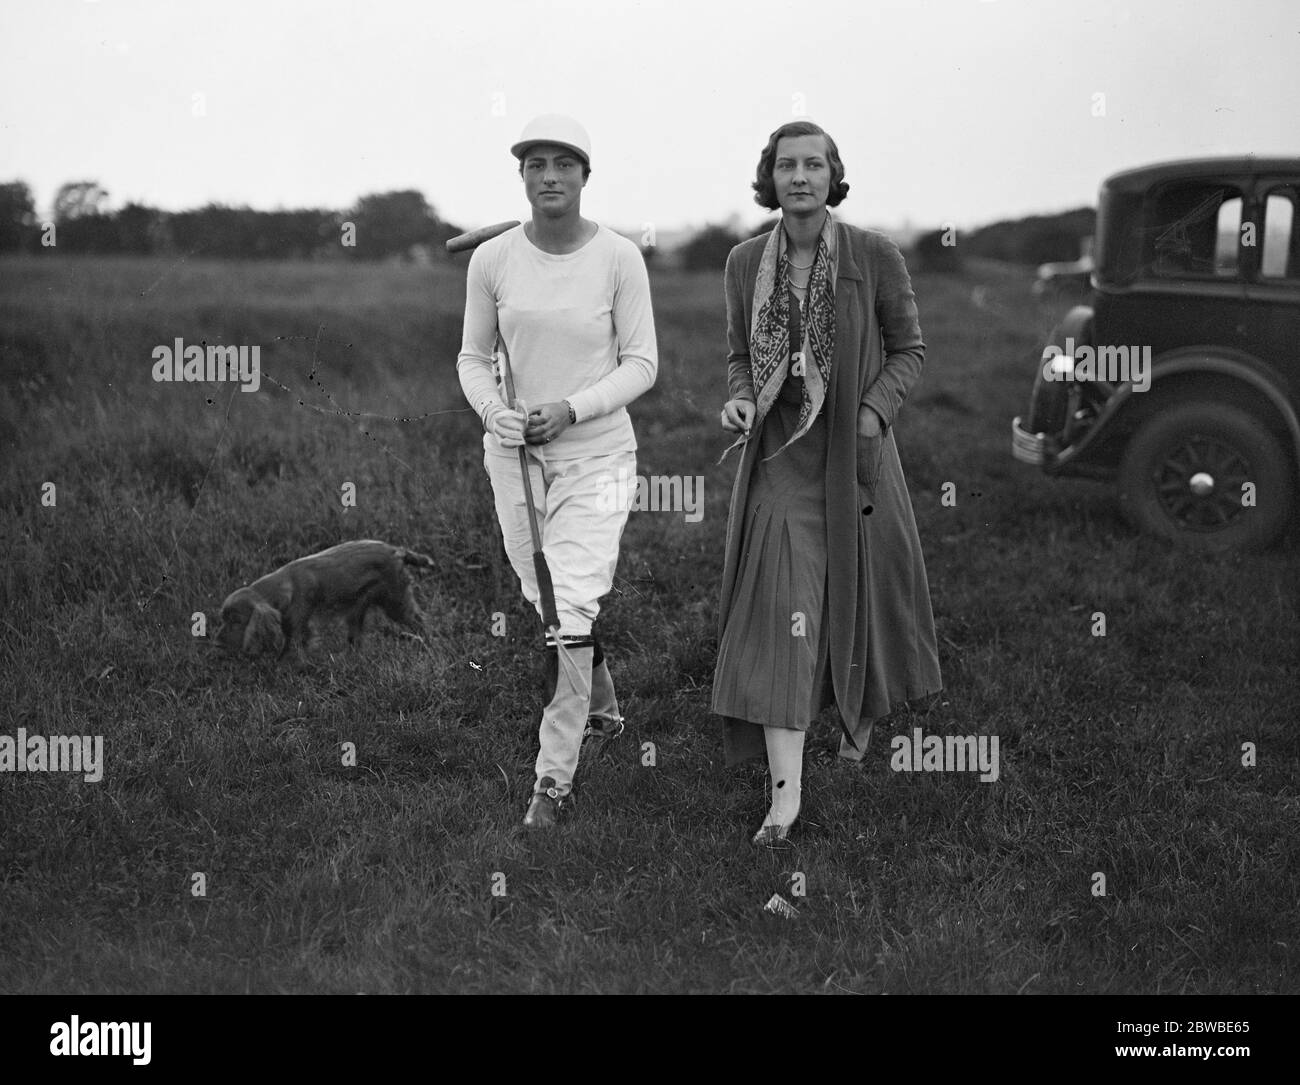 Ladies Polo at Melton Mowbray Lady Priscilla Willoughby and Miss Schreiber 1931 Stock Photo